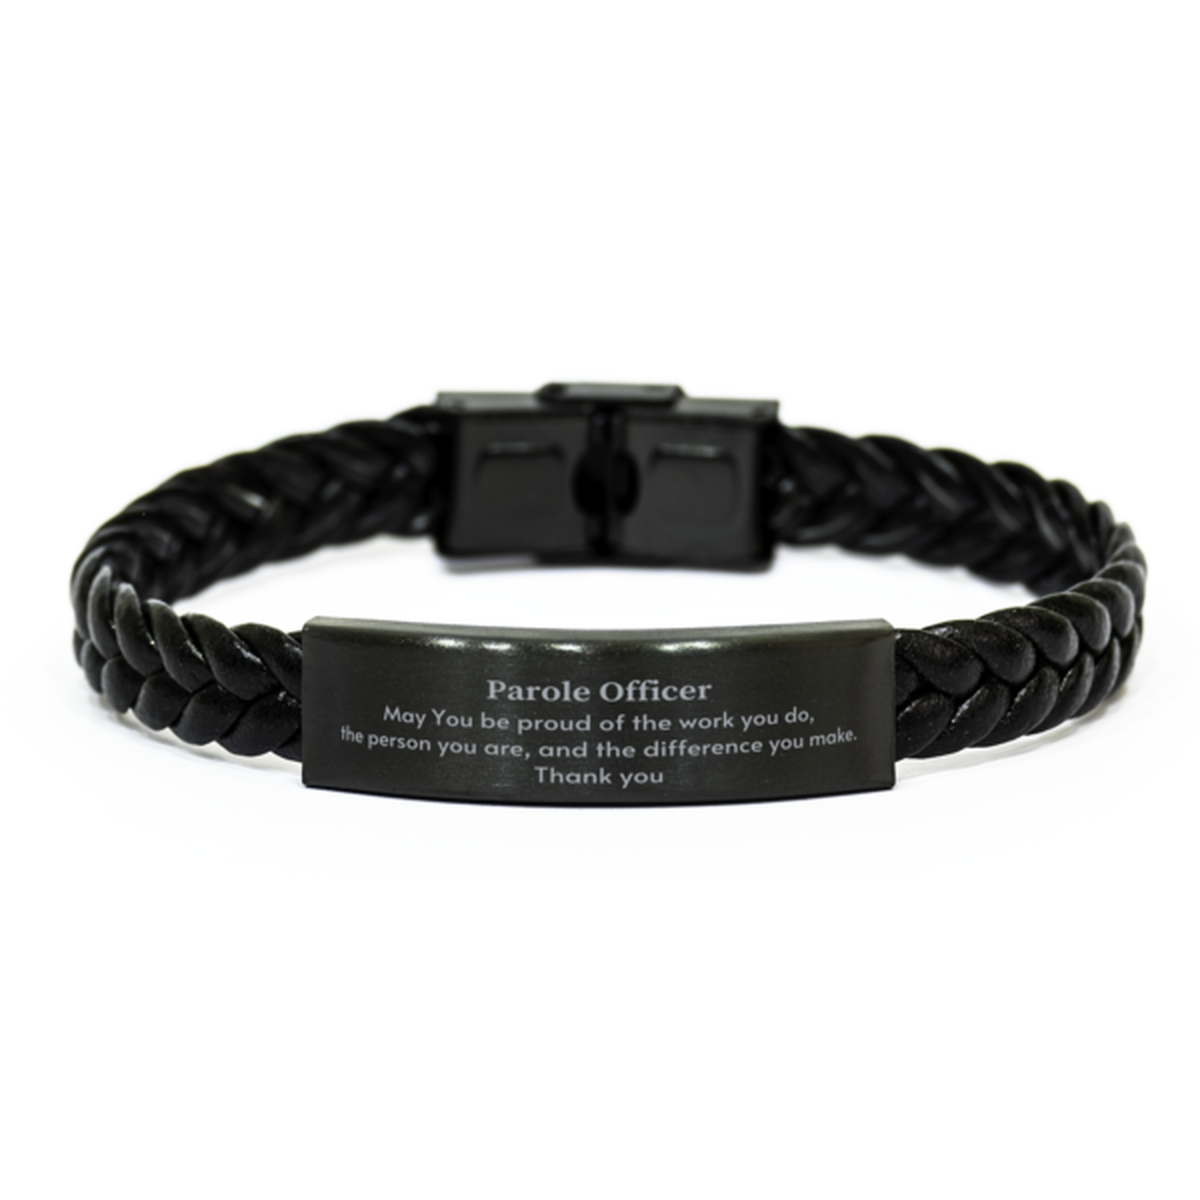 Heartwarming Braided Leather Bracelet Retirement Coworkers Gifts for Parole Officer, Parole Officer May You be proud of the work you do, the person you are Gifts for Boss Men Women Friends